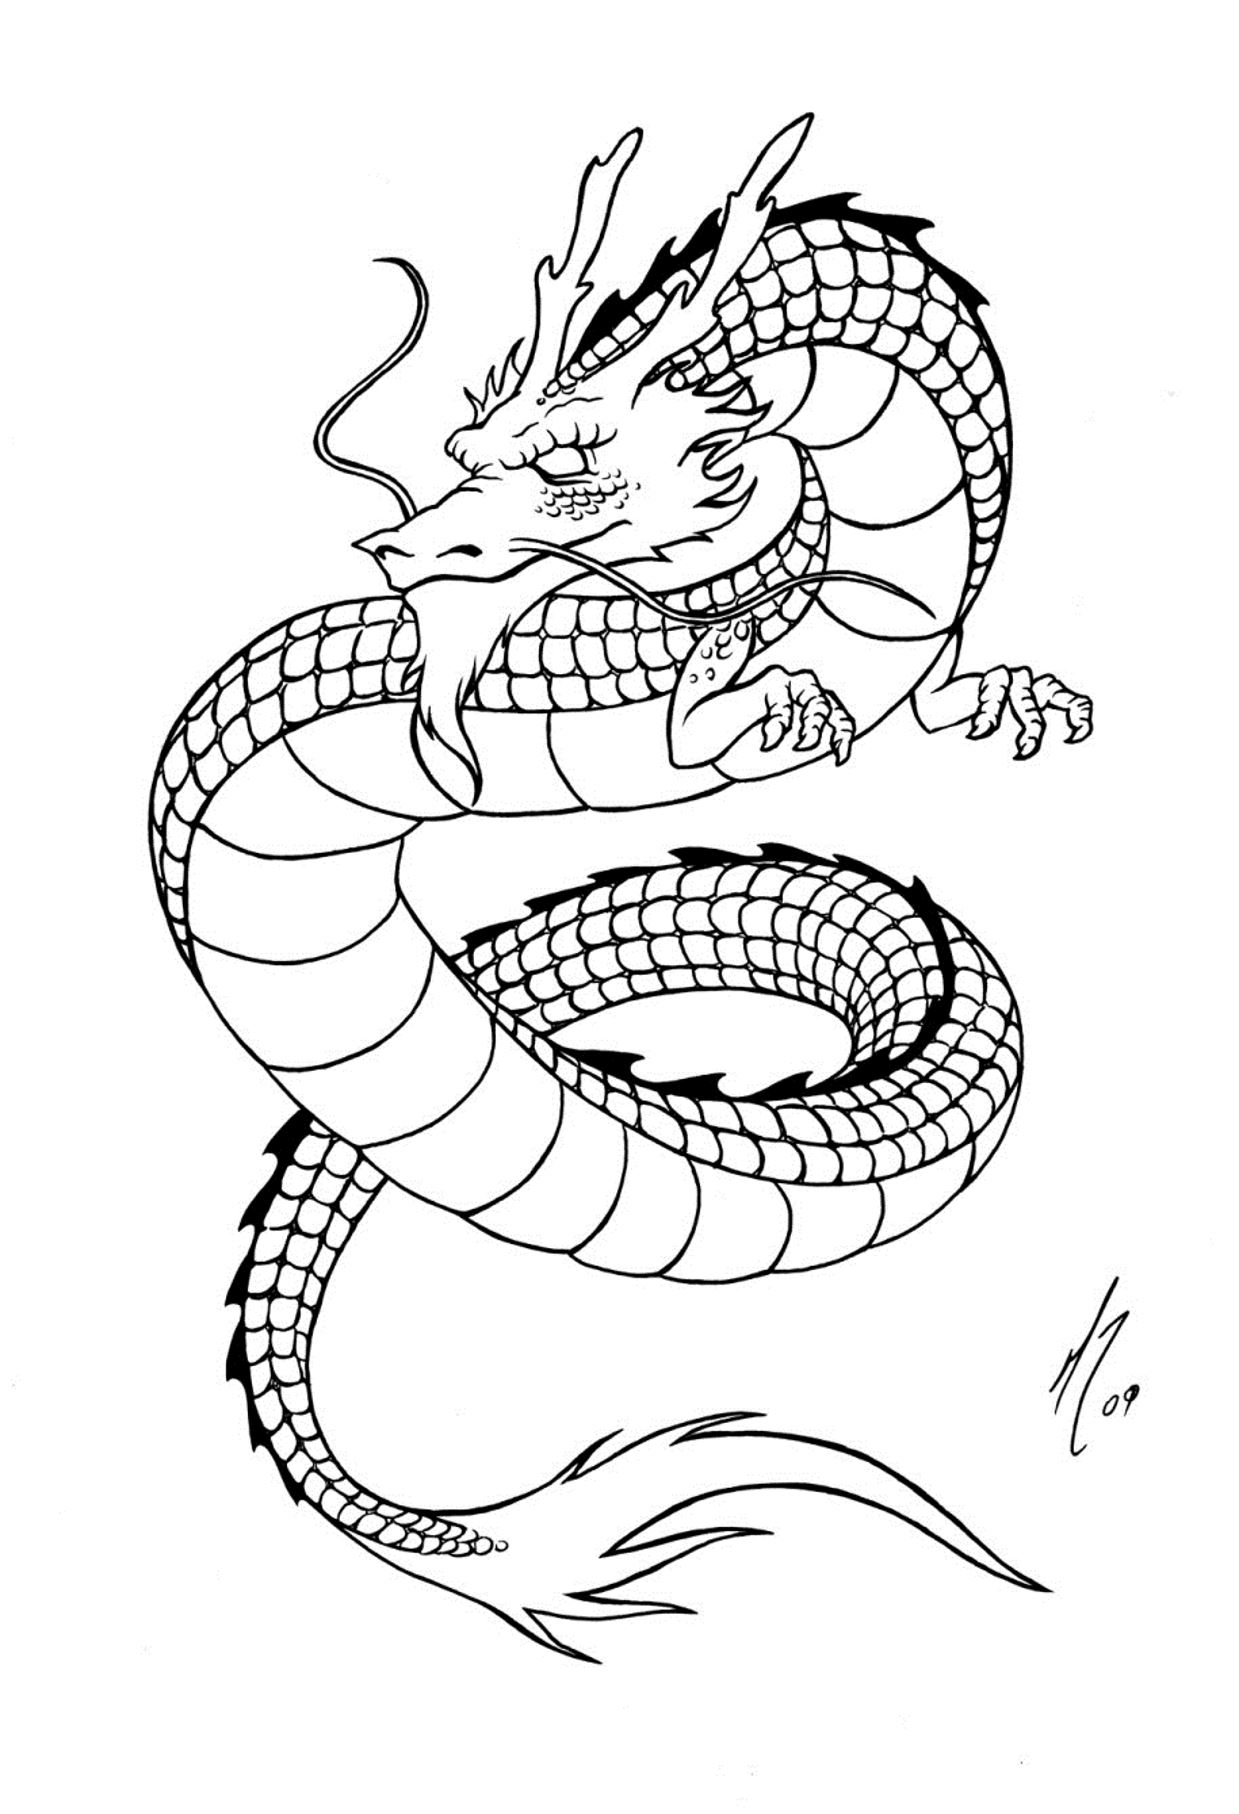 Tattoo-chinese-dragon - Tattoos Adult Coloring Pages